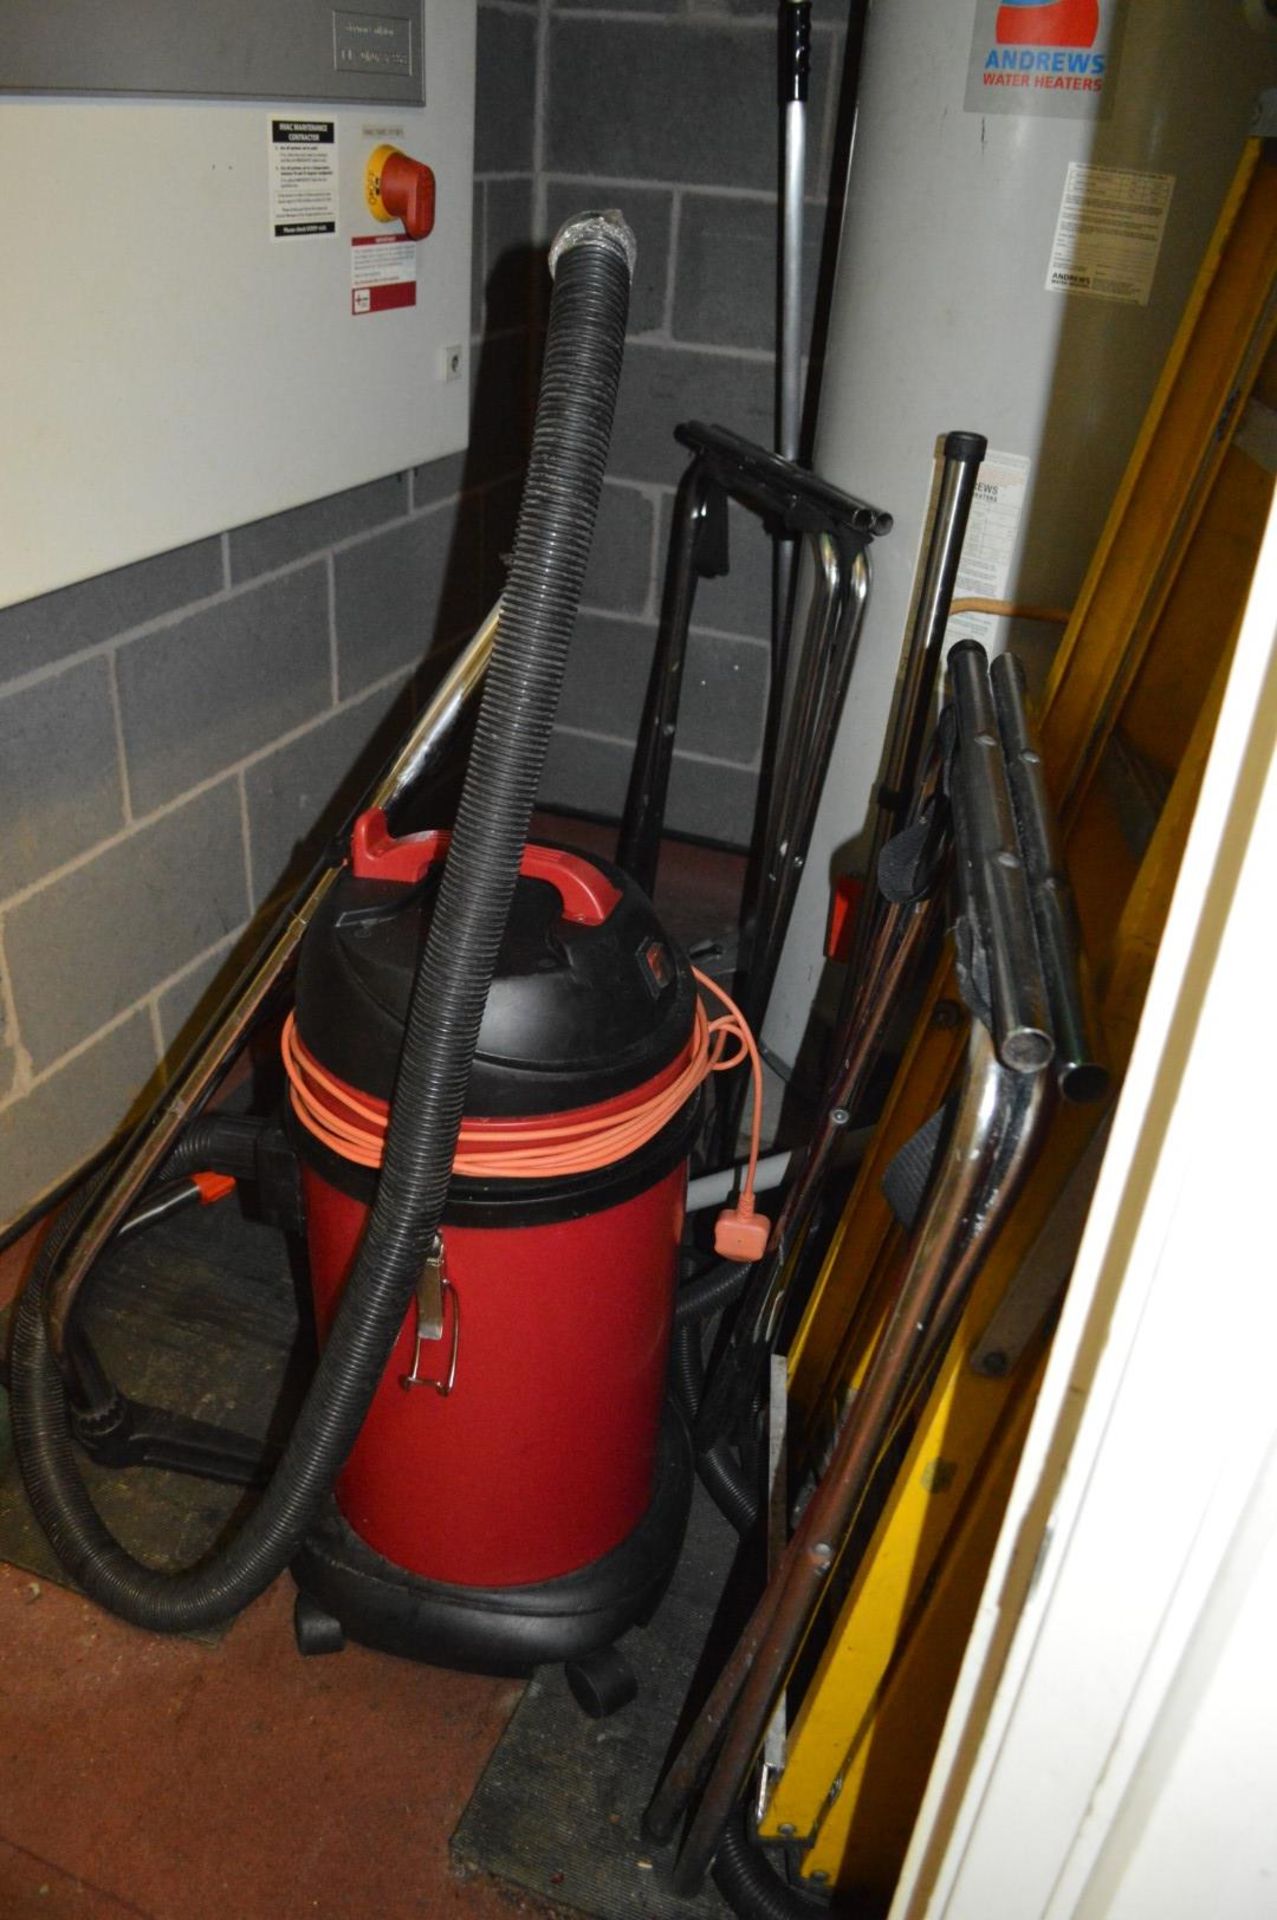 1 x Viper Wet and Dry Vacuum Cleaner - Model SU135P - 35 Litre - CL357 - Location: Bolton BL1 This